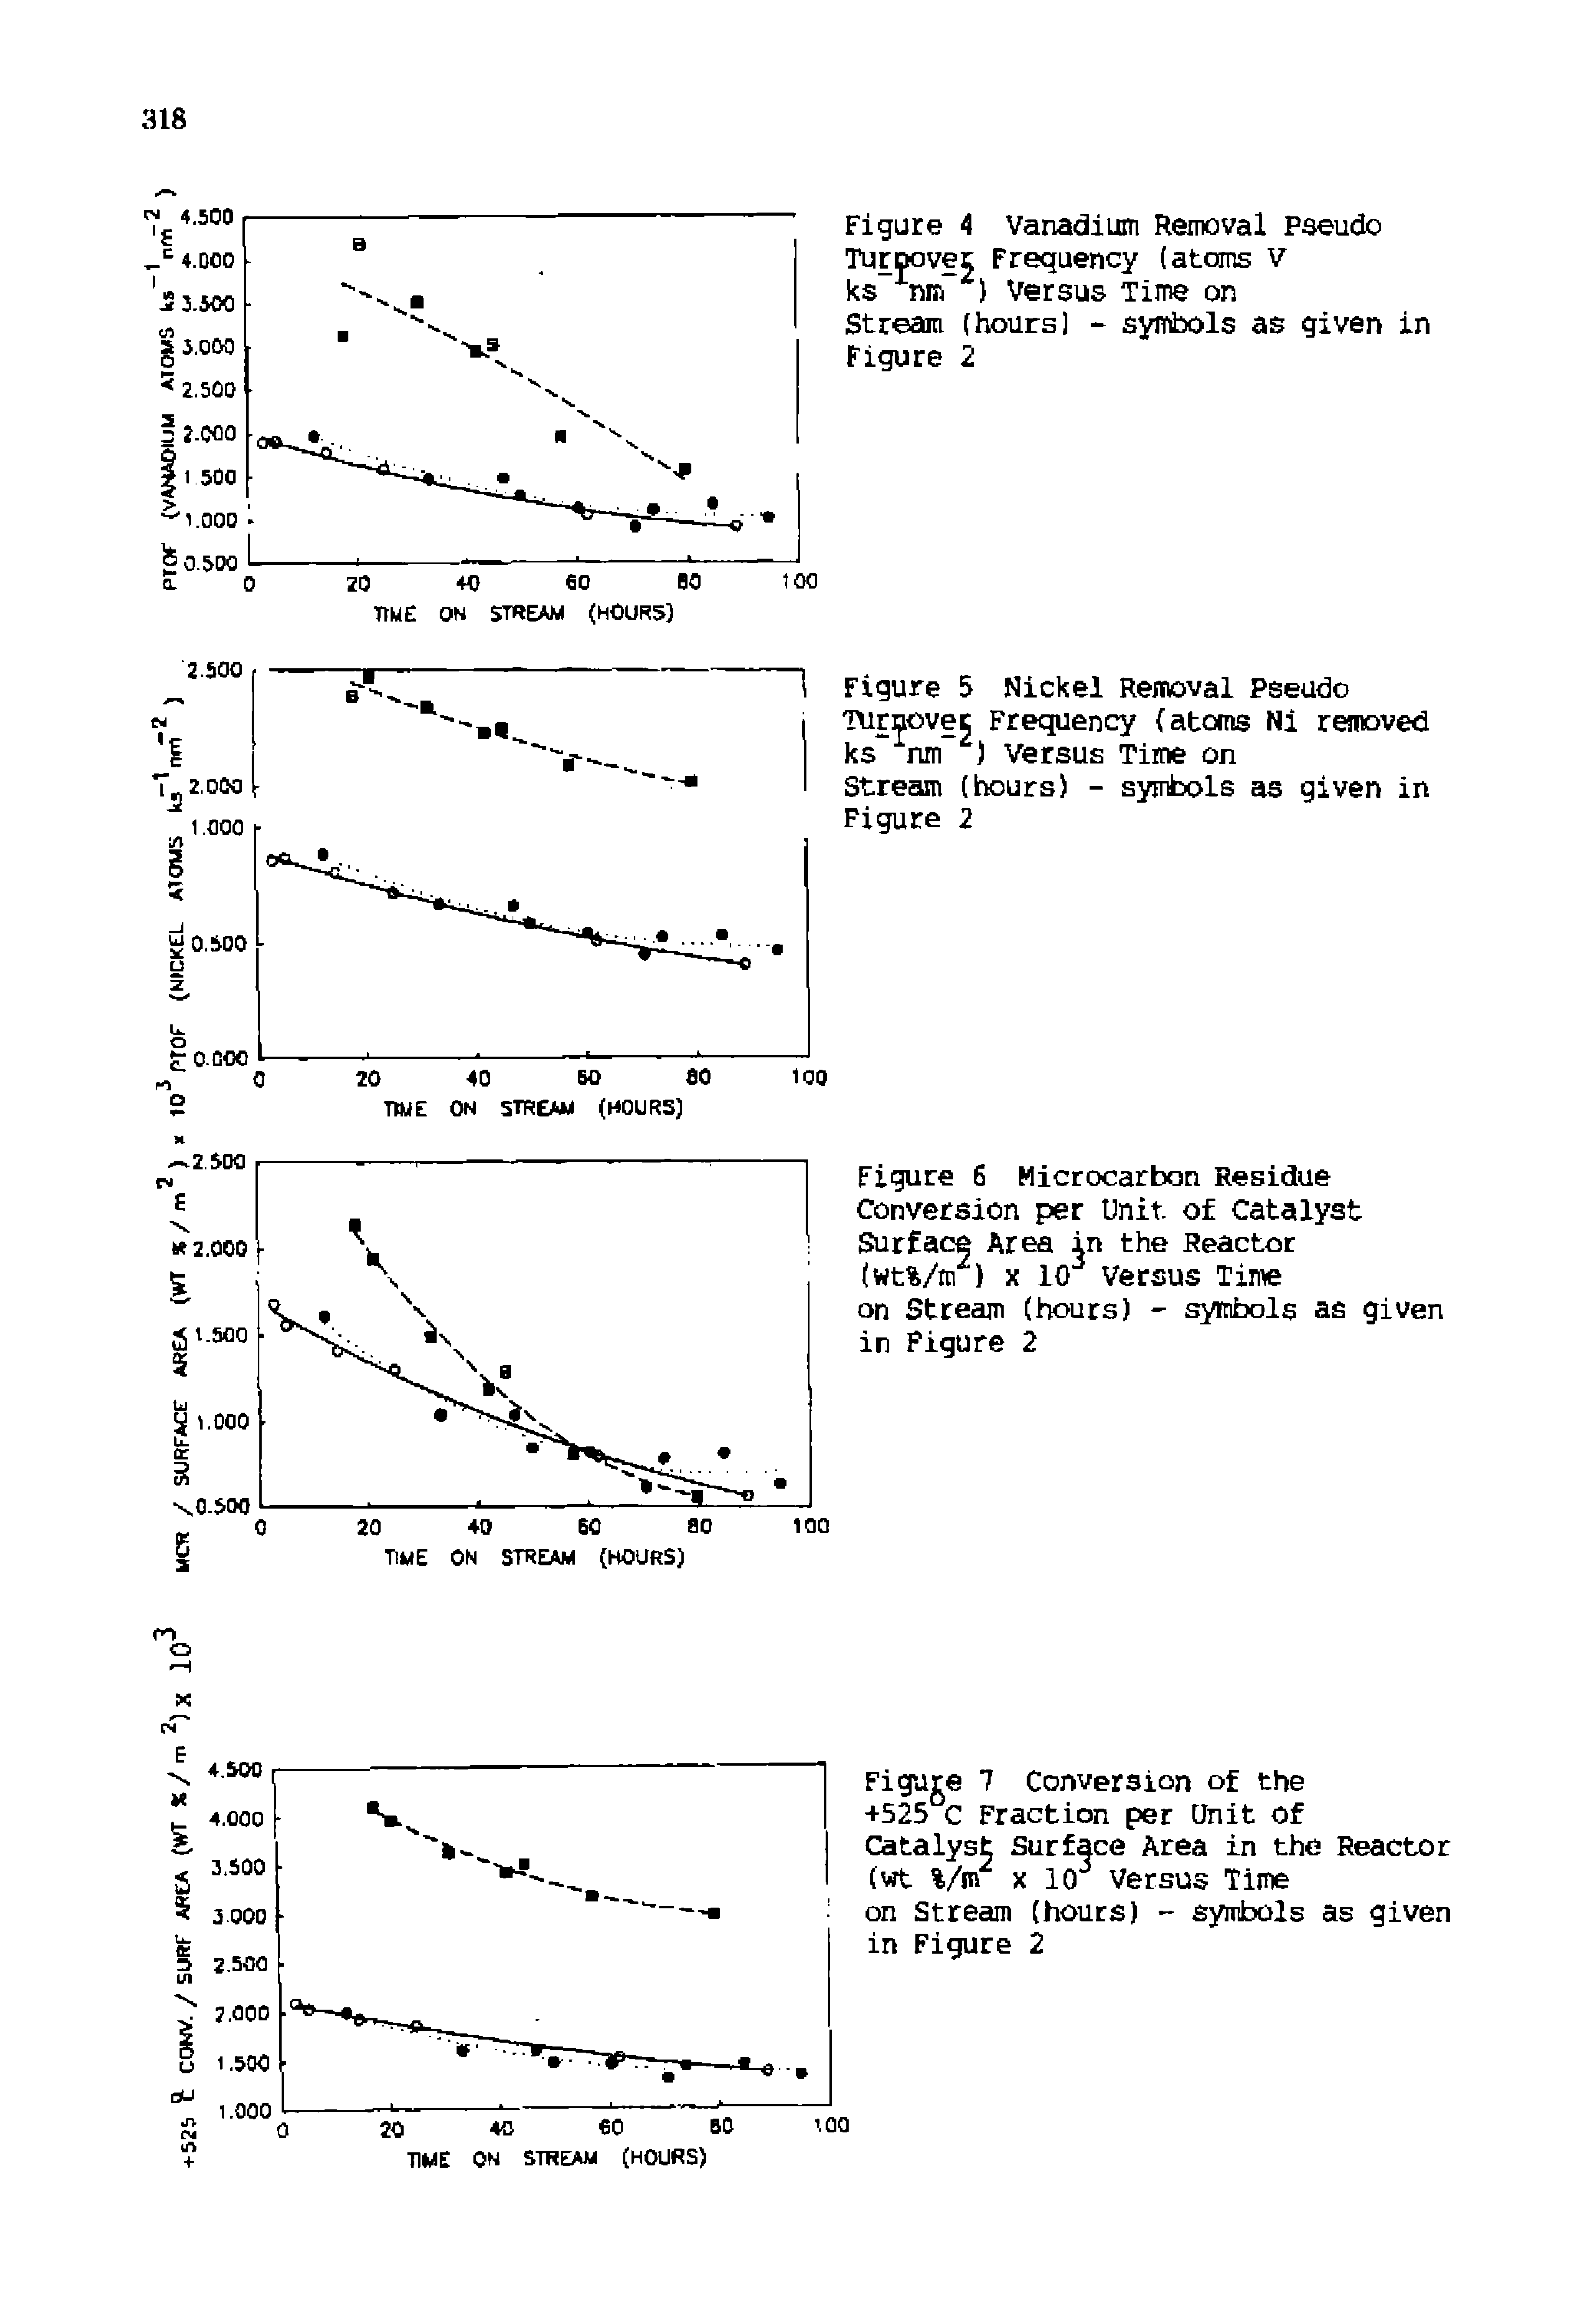 Figure 6 Microcarbon Residue Conversion per Unit of Catalyst Surface Area in the Reactor (wt%/m ) X 10 Versus Time on Stream (hours) symbols as given in Figure 2...